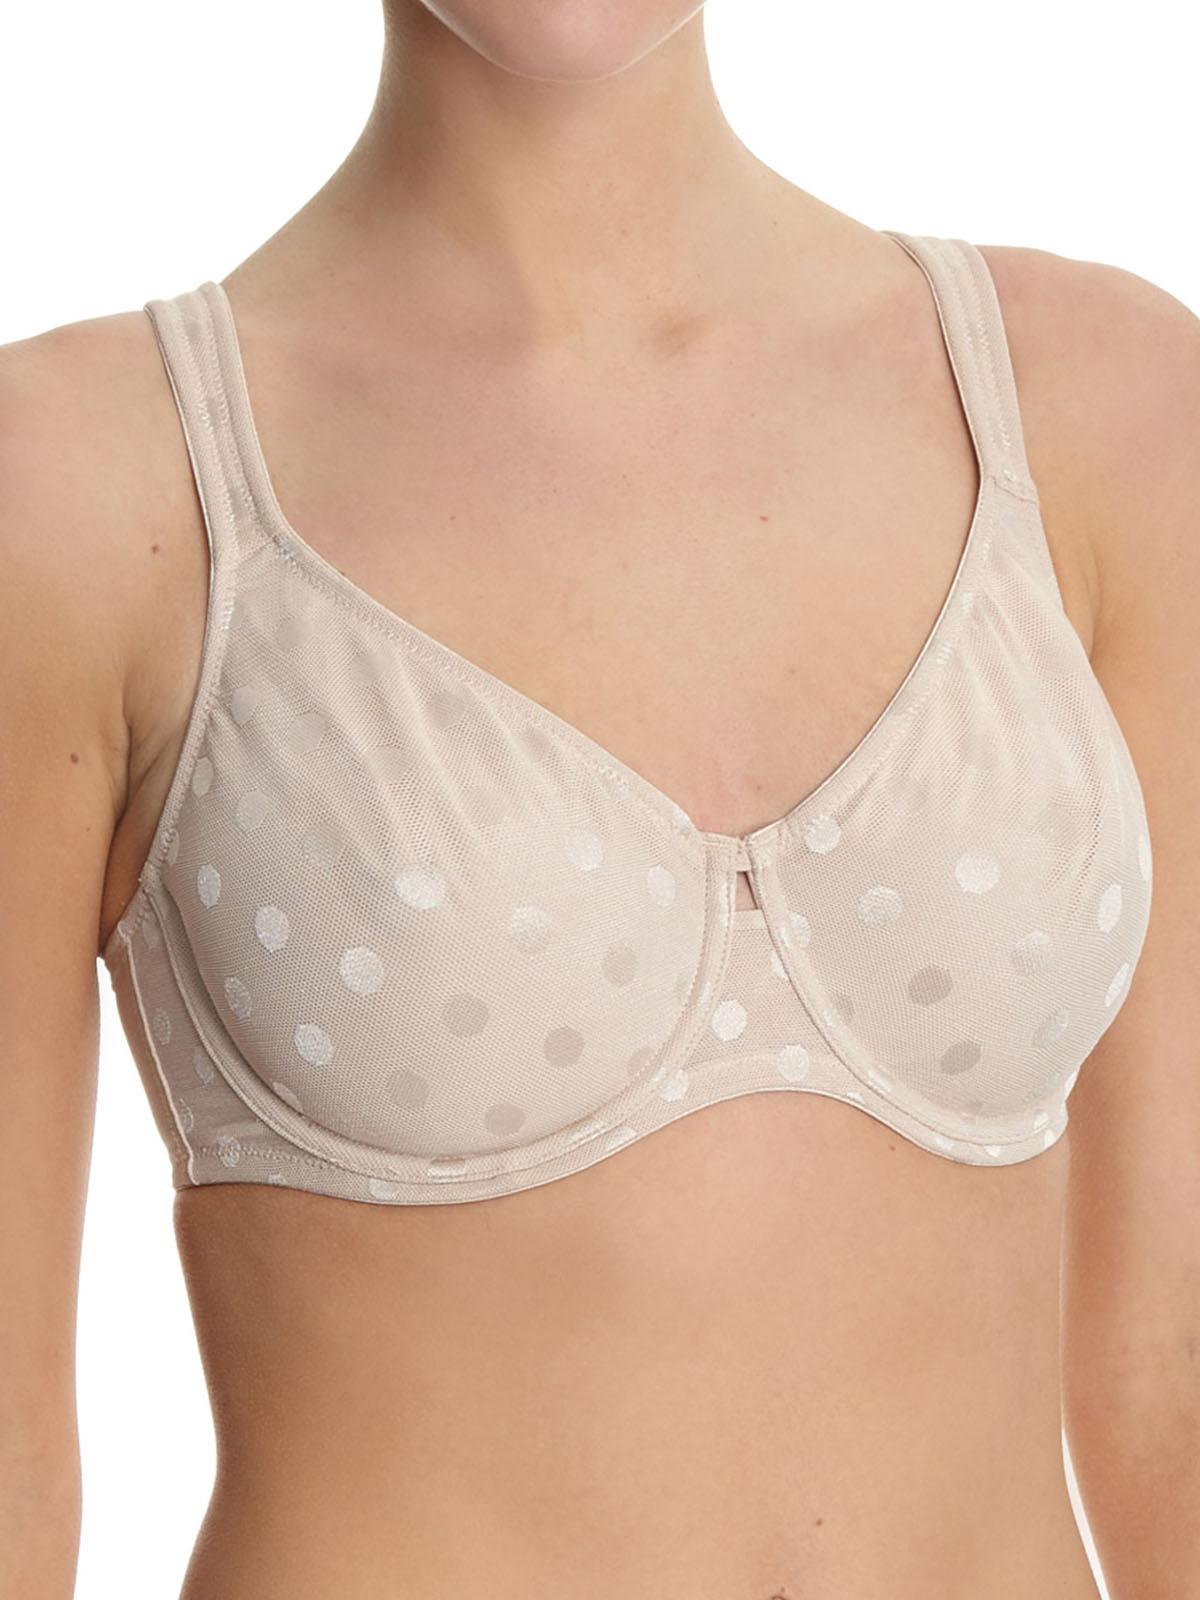 Dunn3s NUDE Spotted Underwired Full Cup Bra - Size 34 to 40 (D-DD-E-F)